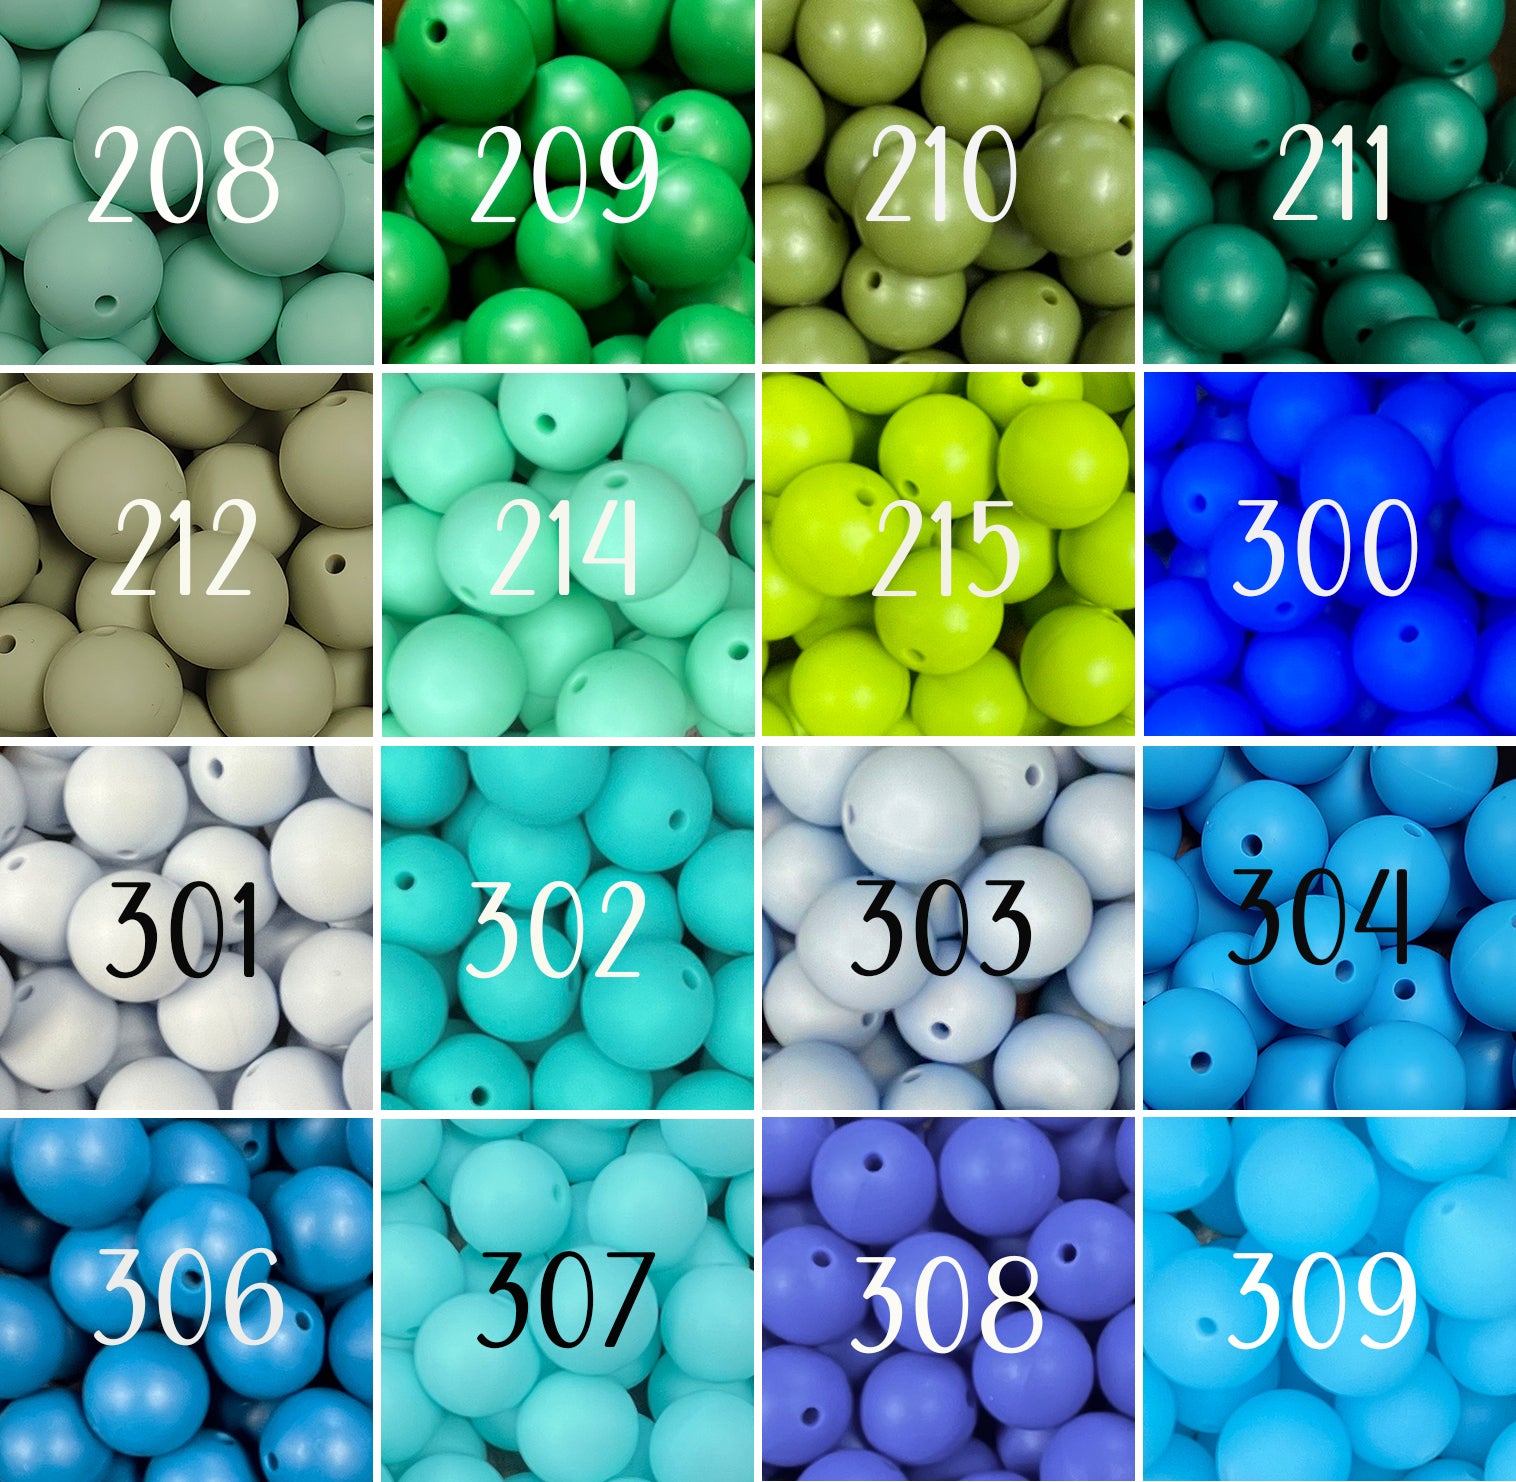 12mm Sky Blue Silicone Beads, Silicone Beads in Bulk, 12mm